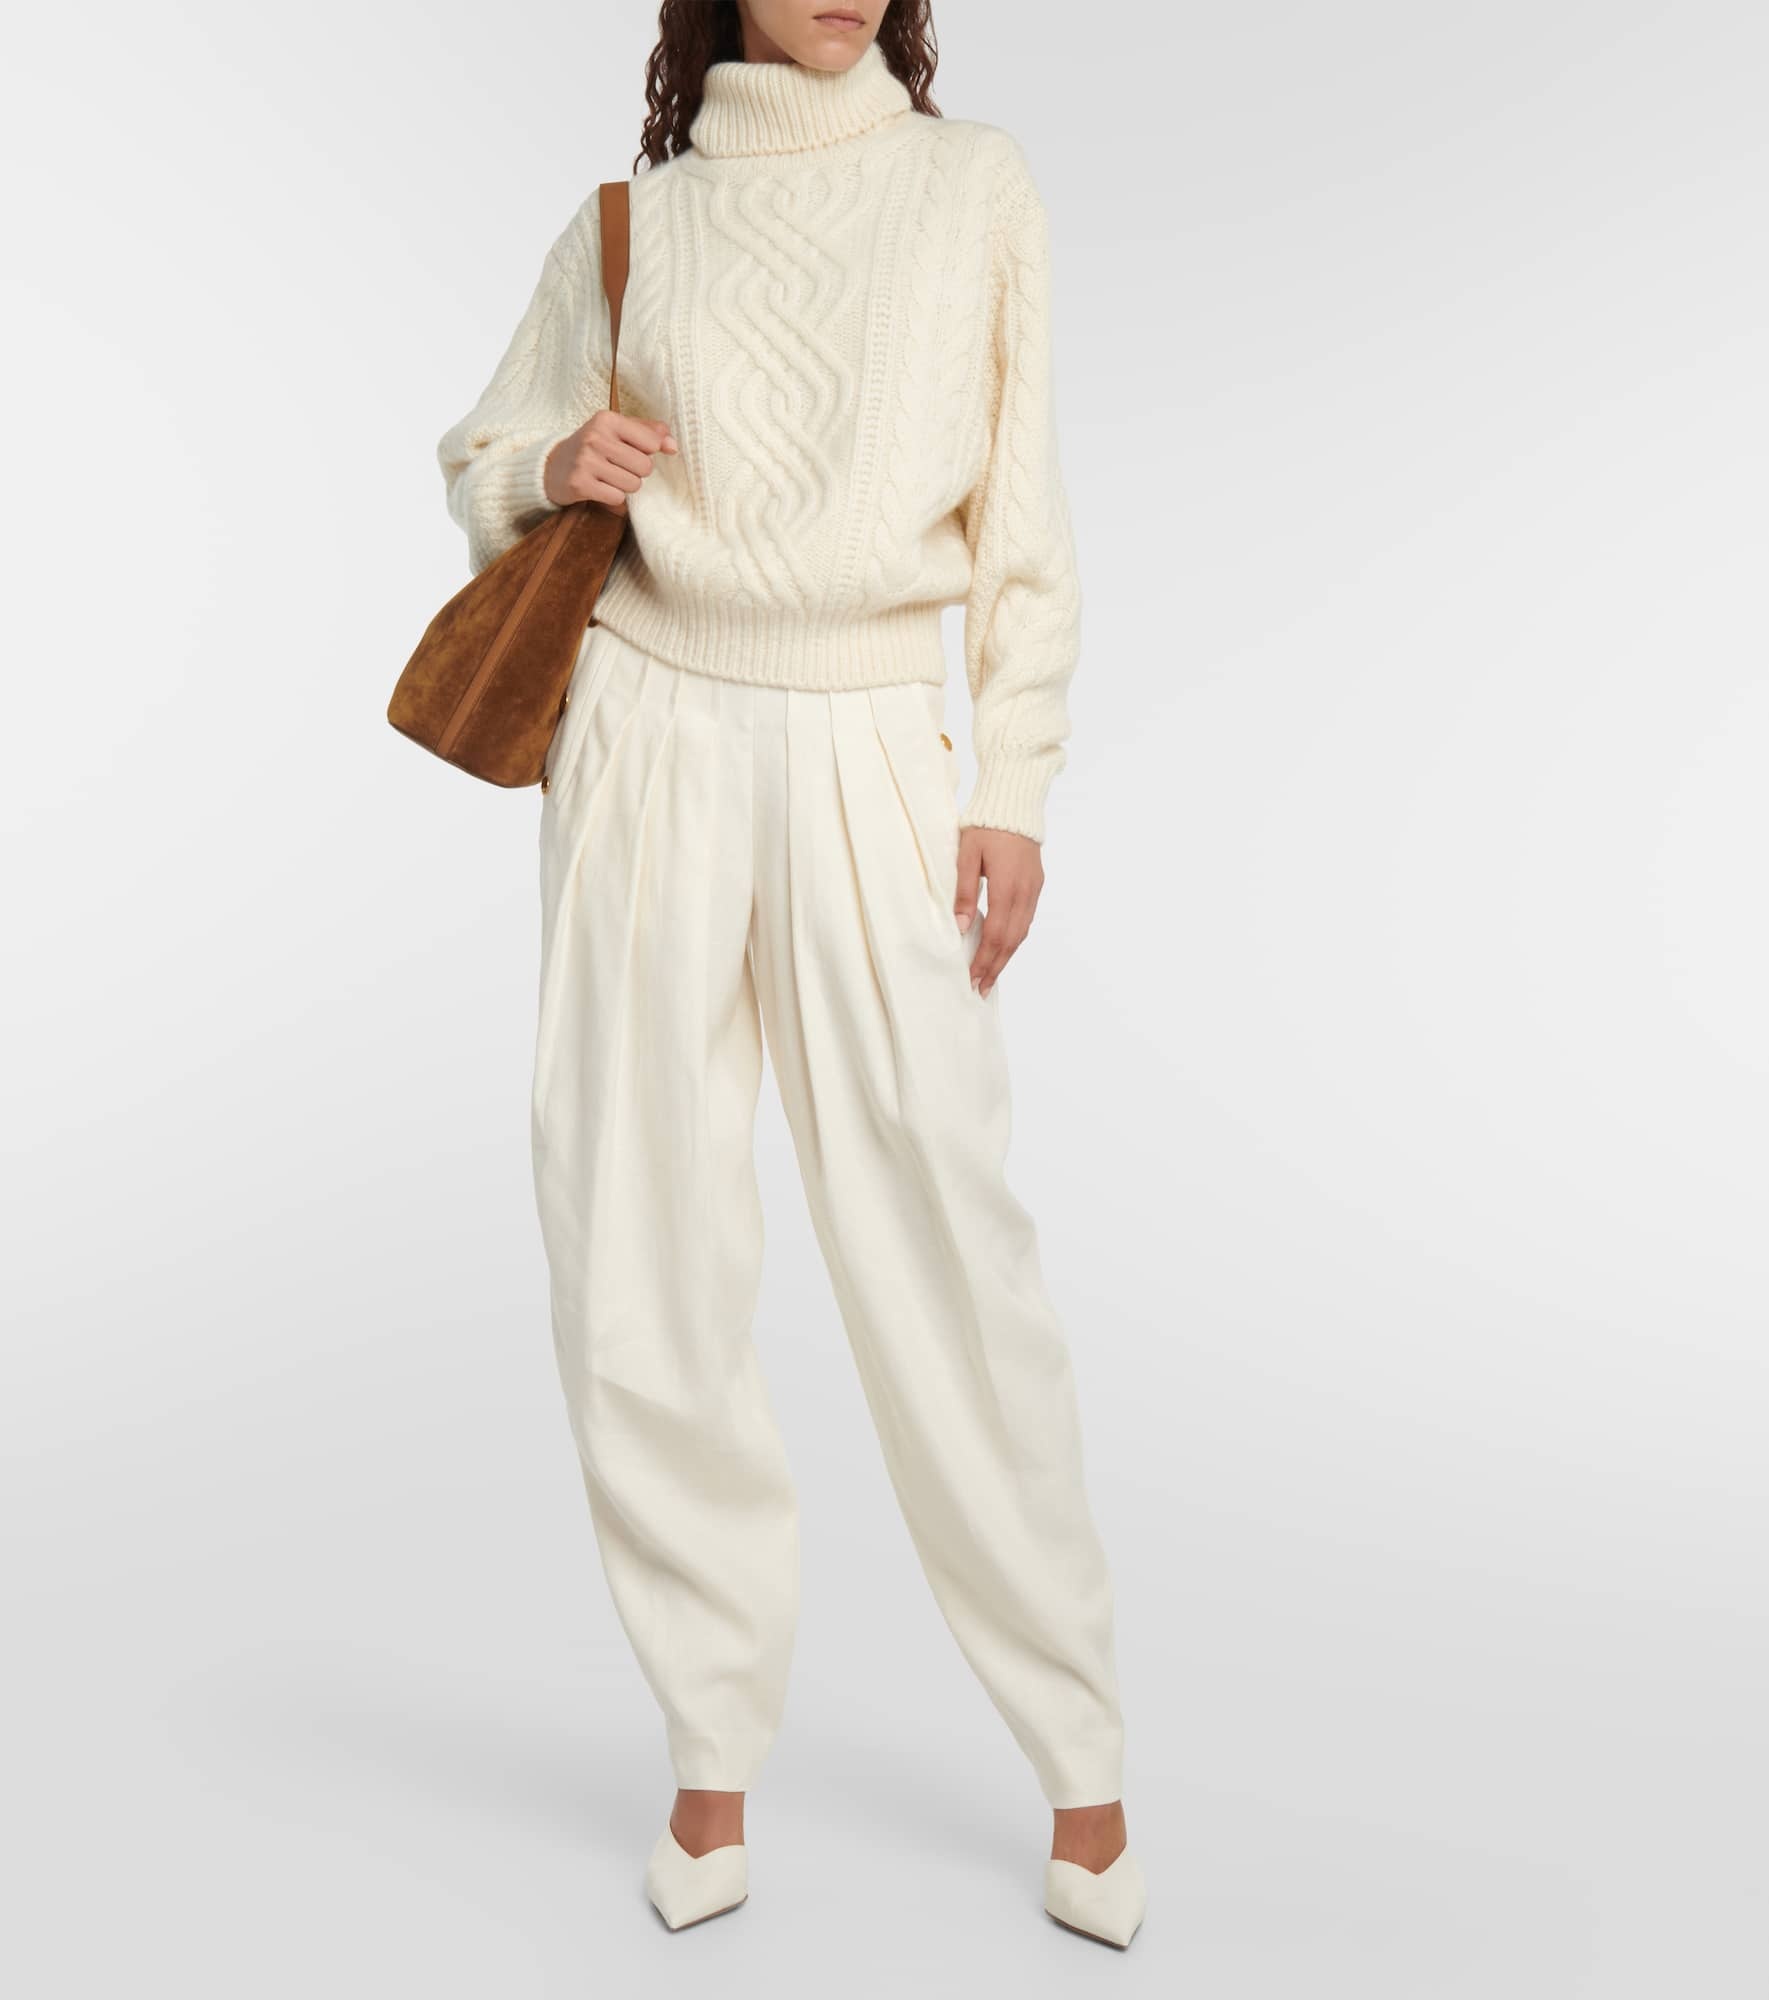 Erdenet cashmere and mohair sweater - 2